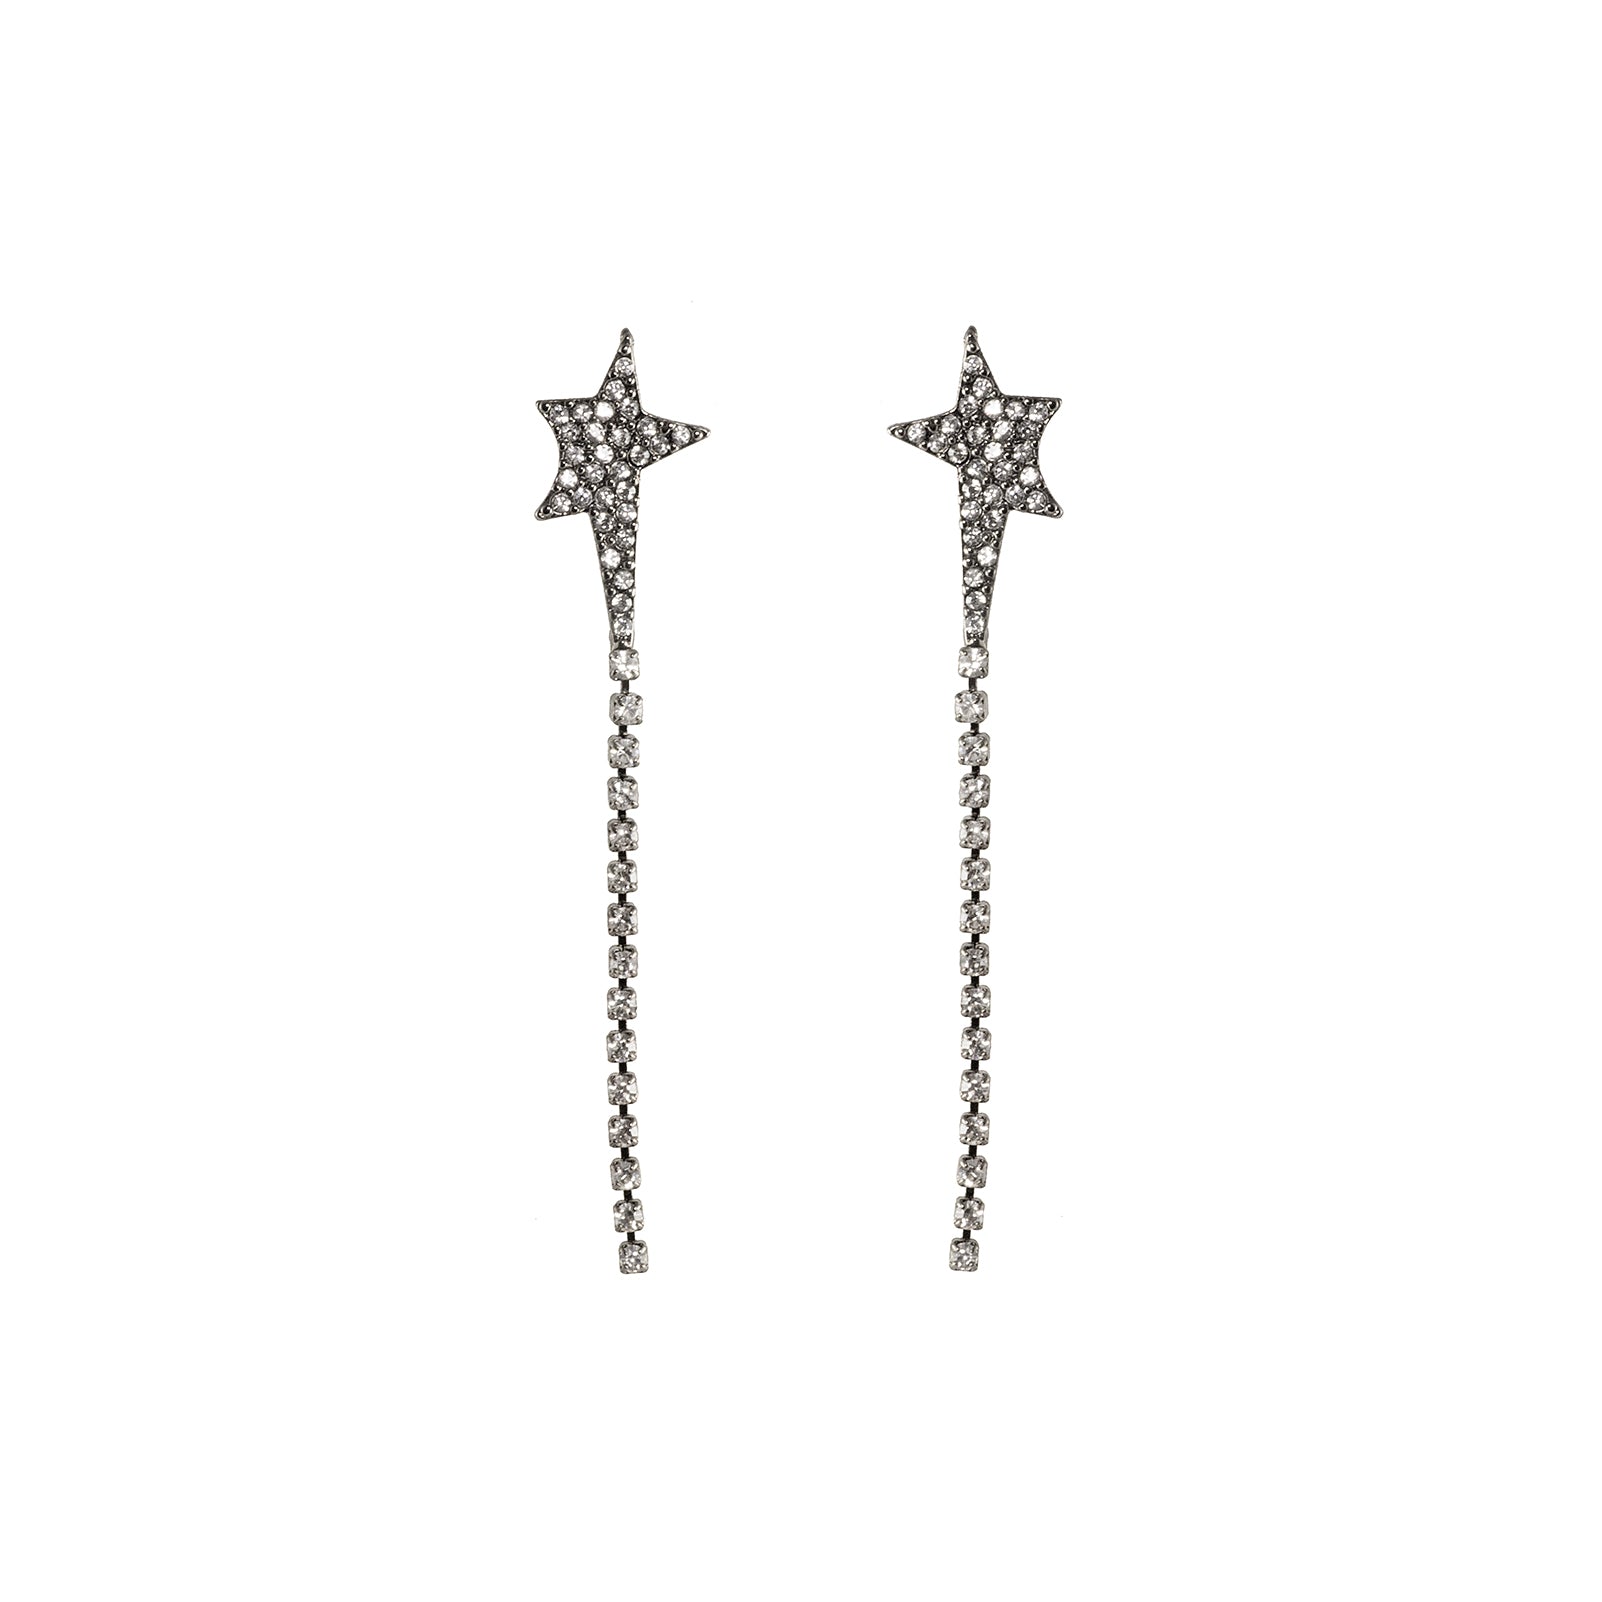 For chicks that have a thing for stars.  These earrings shaped as shooting stars is just the thing. 